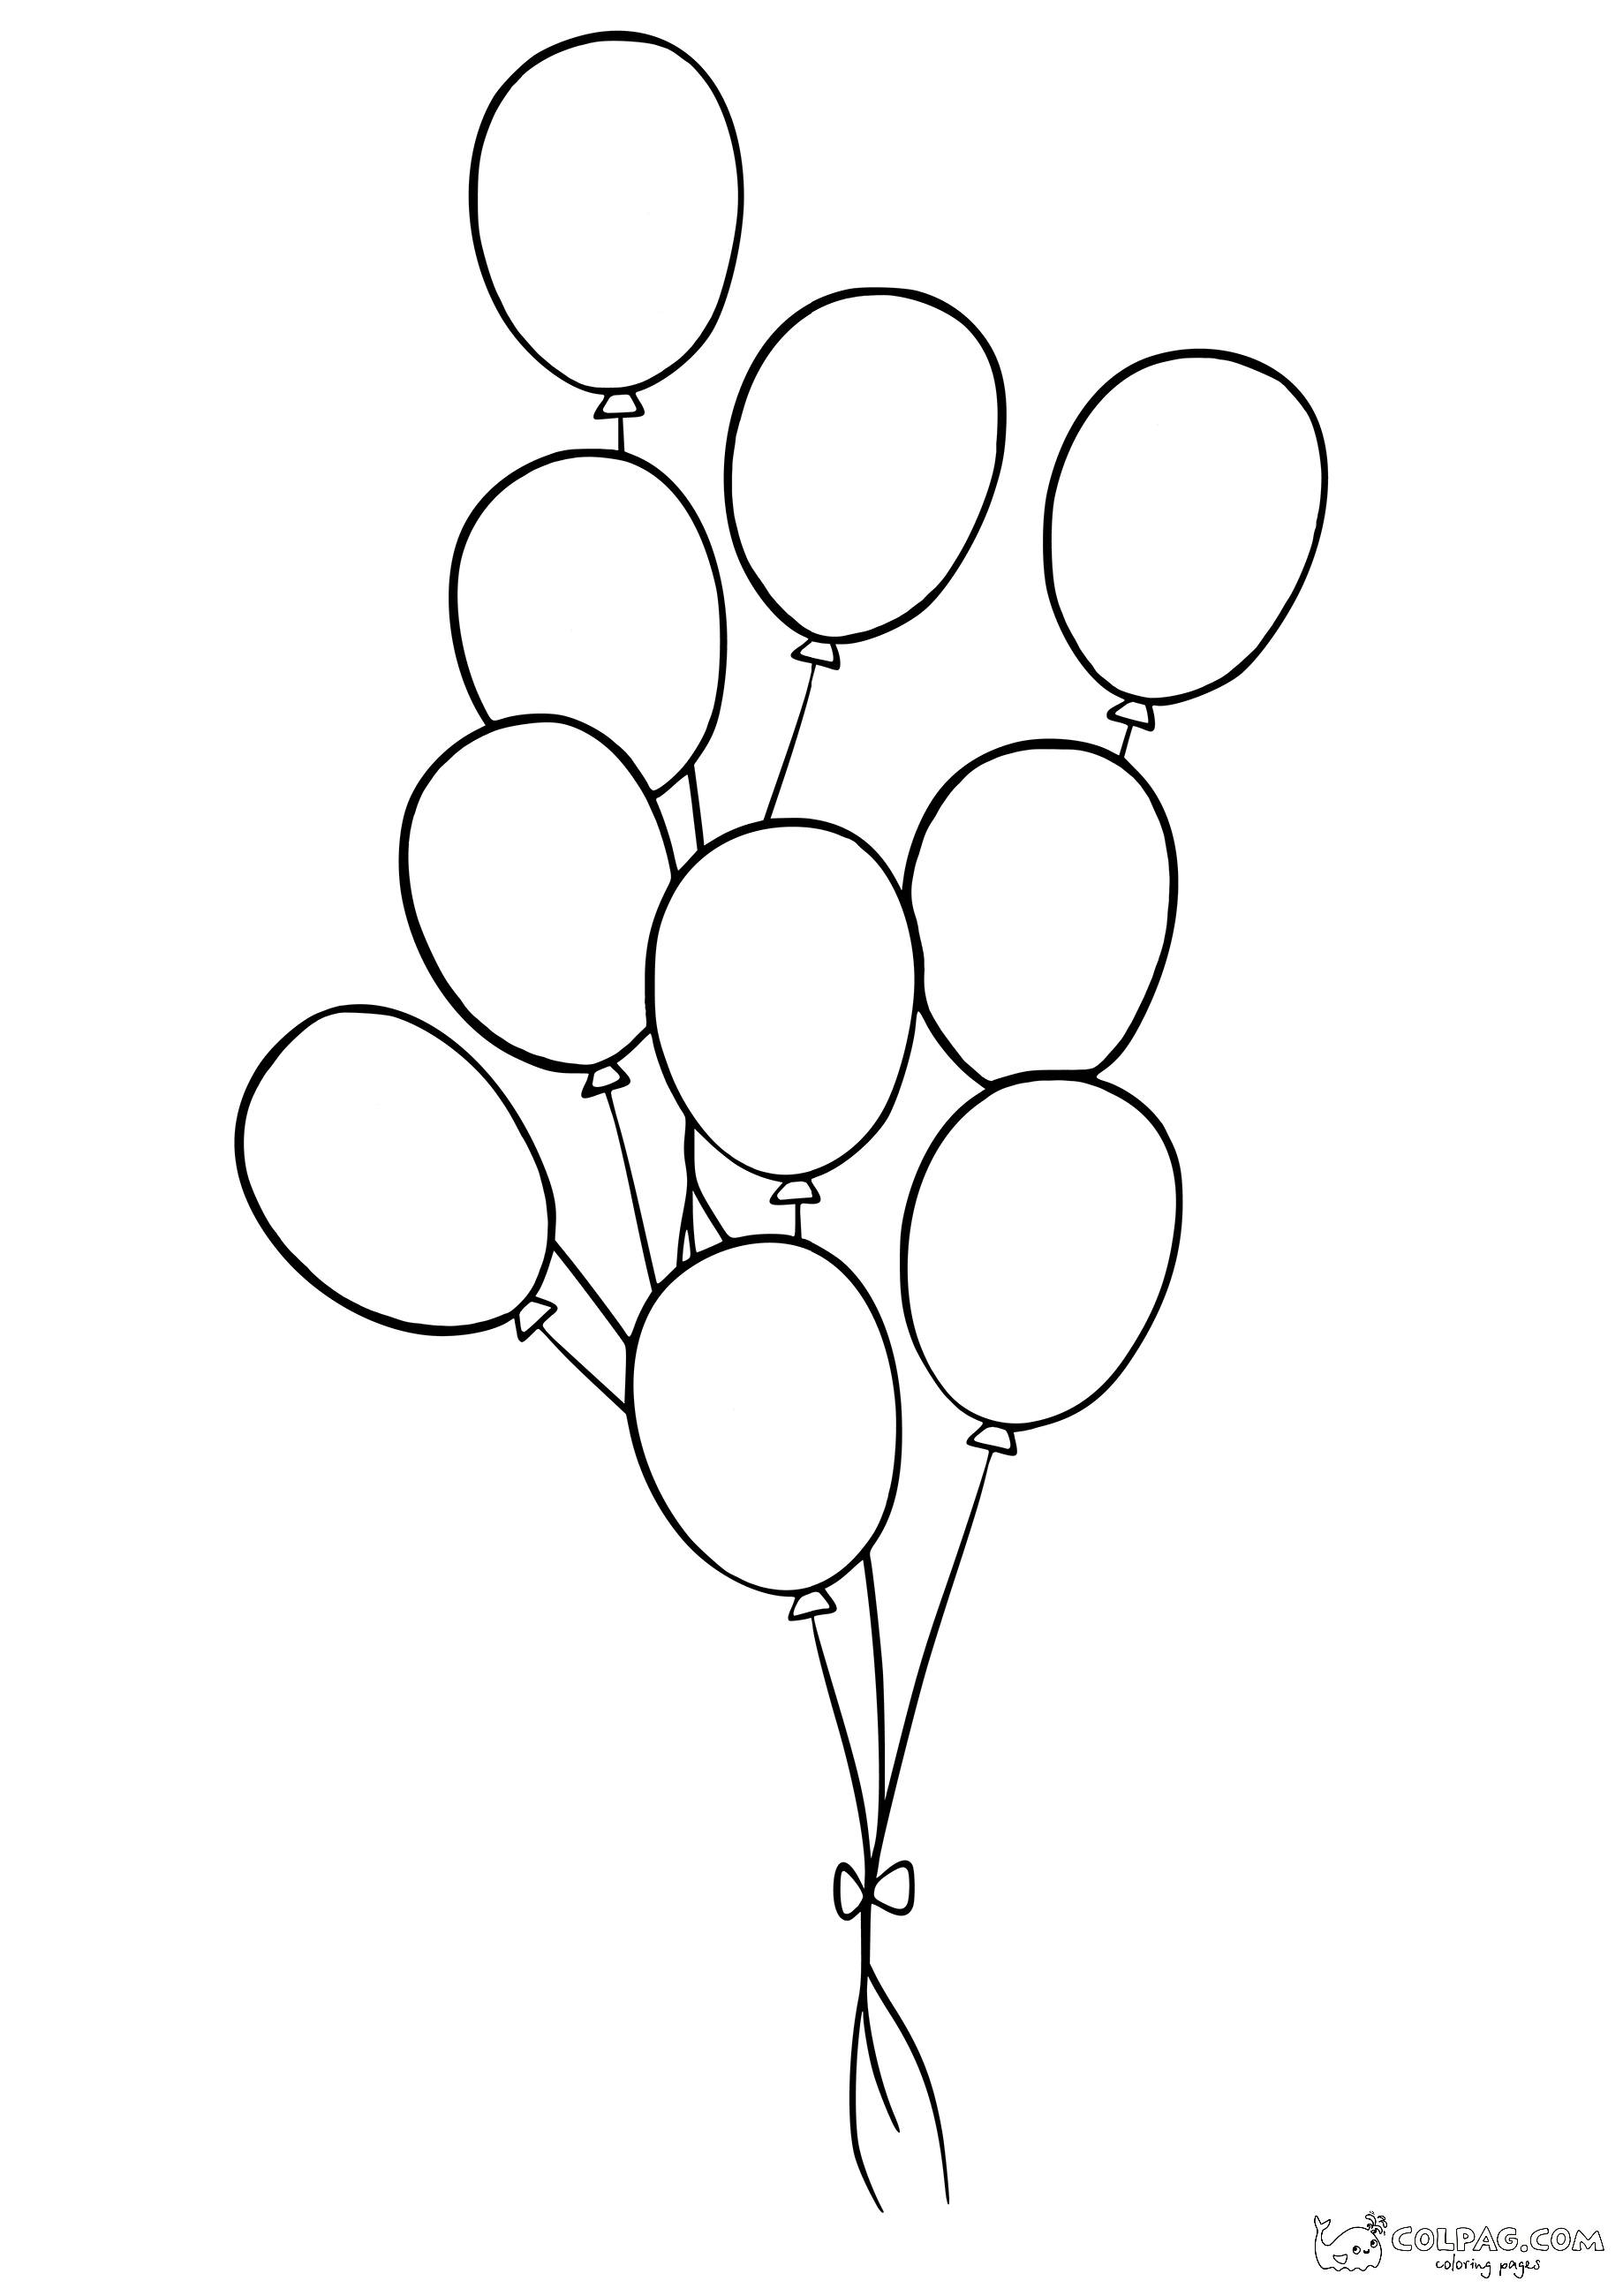 3-ten-baloons-for-birthday-party-coloring-page-colpag-3